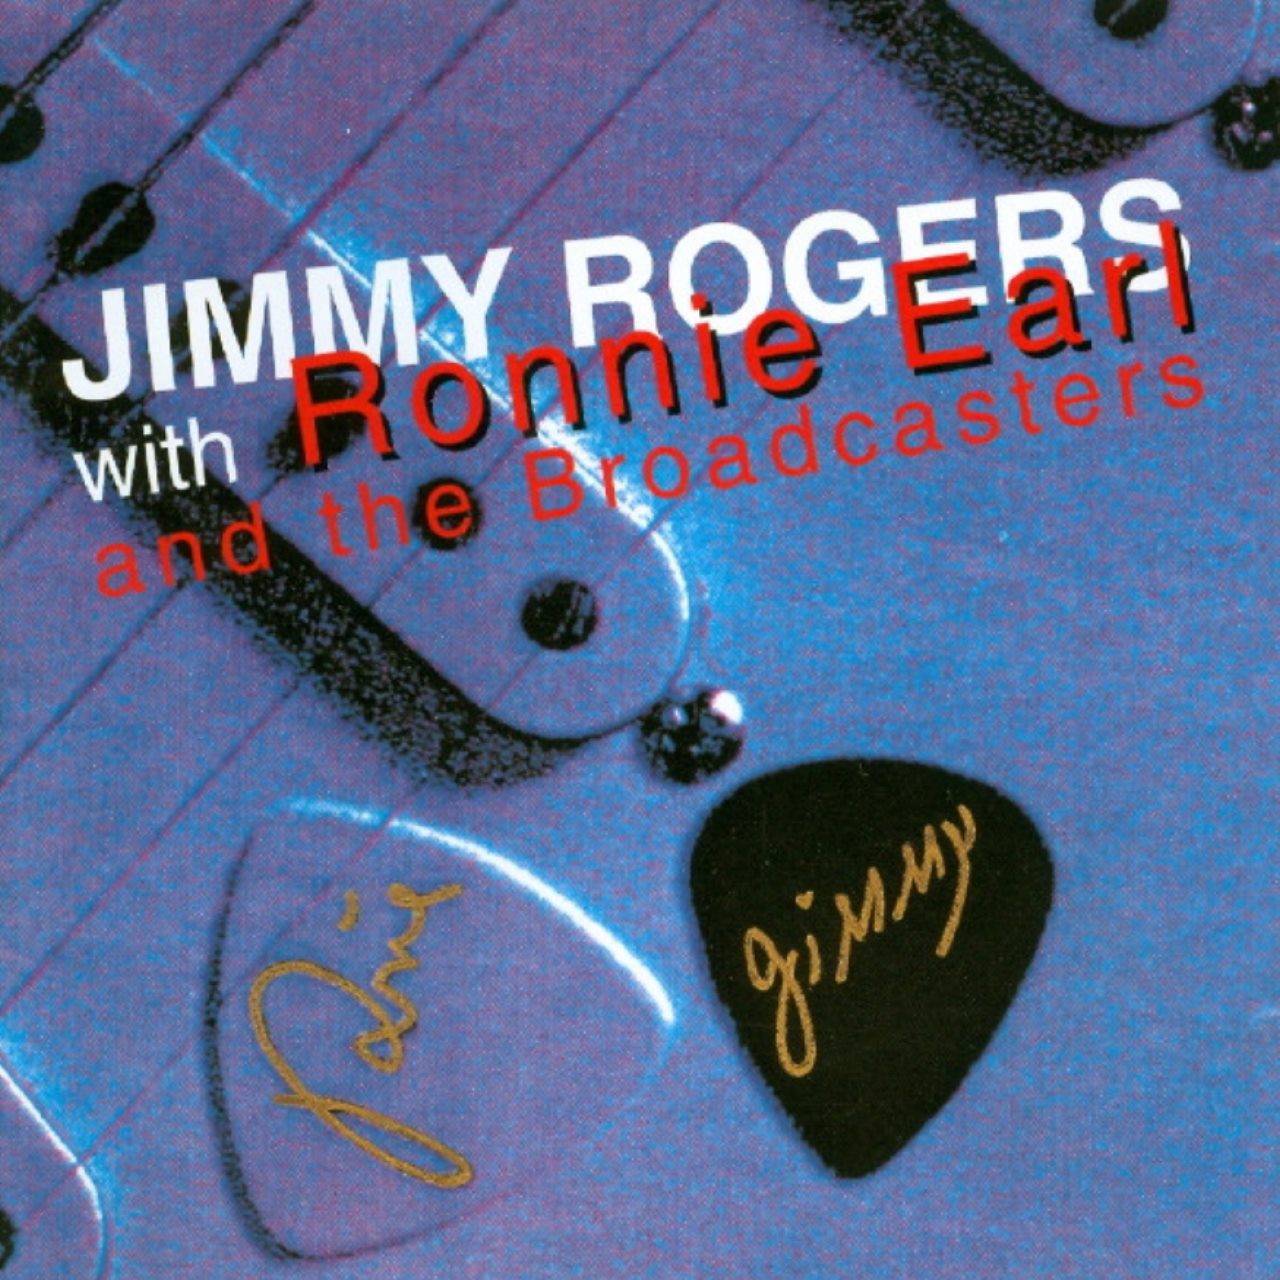 Jimmy Rogers With Ronnie Earl & Broadcasters – Ronnie & Jimmy cover album